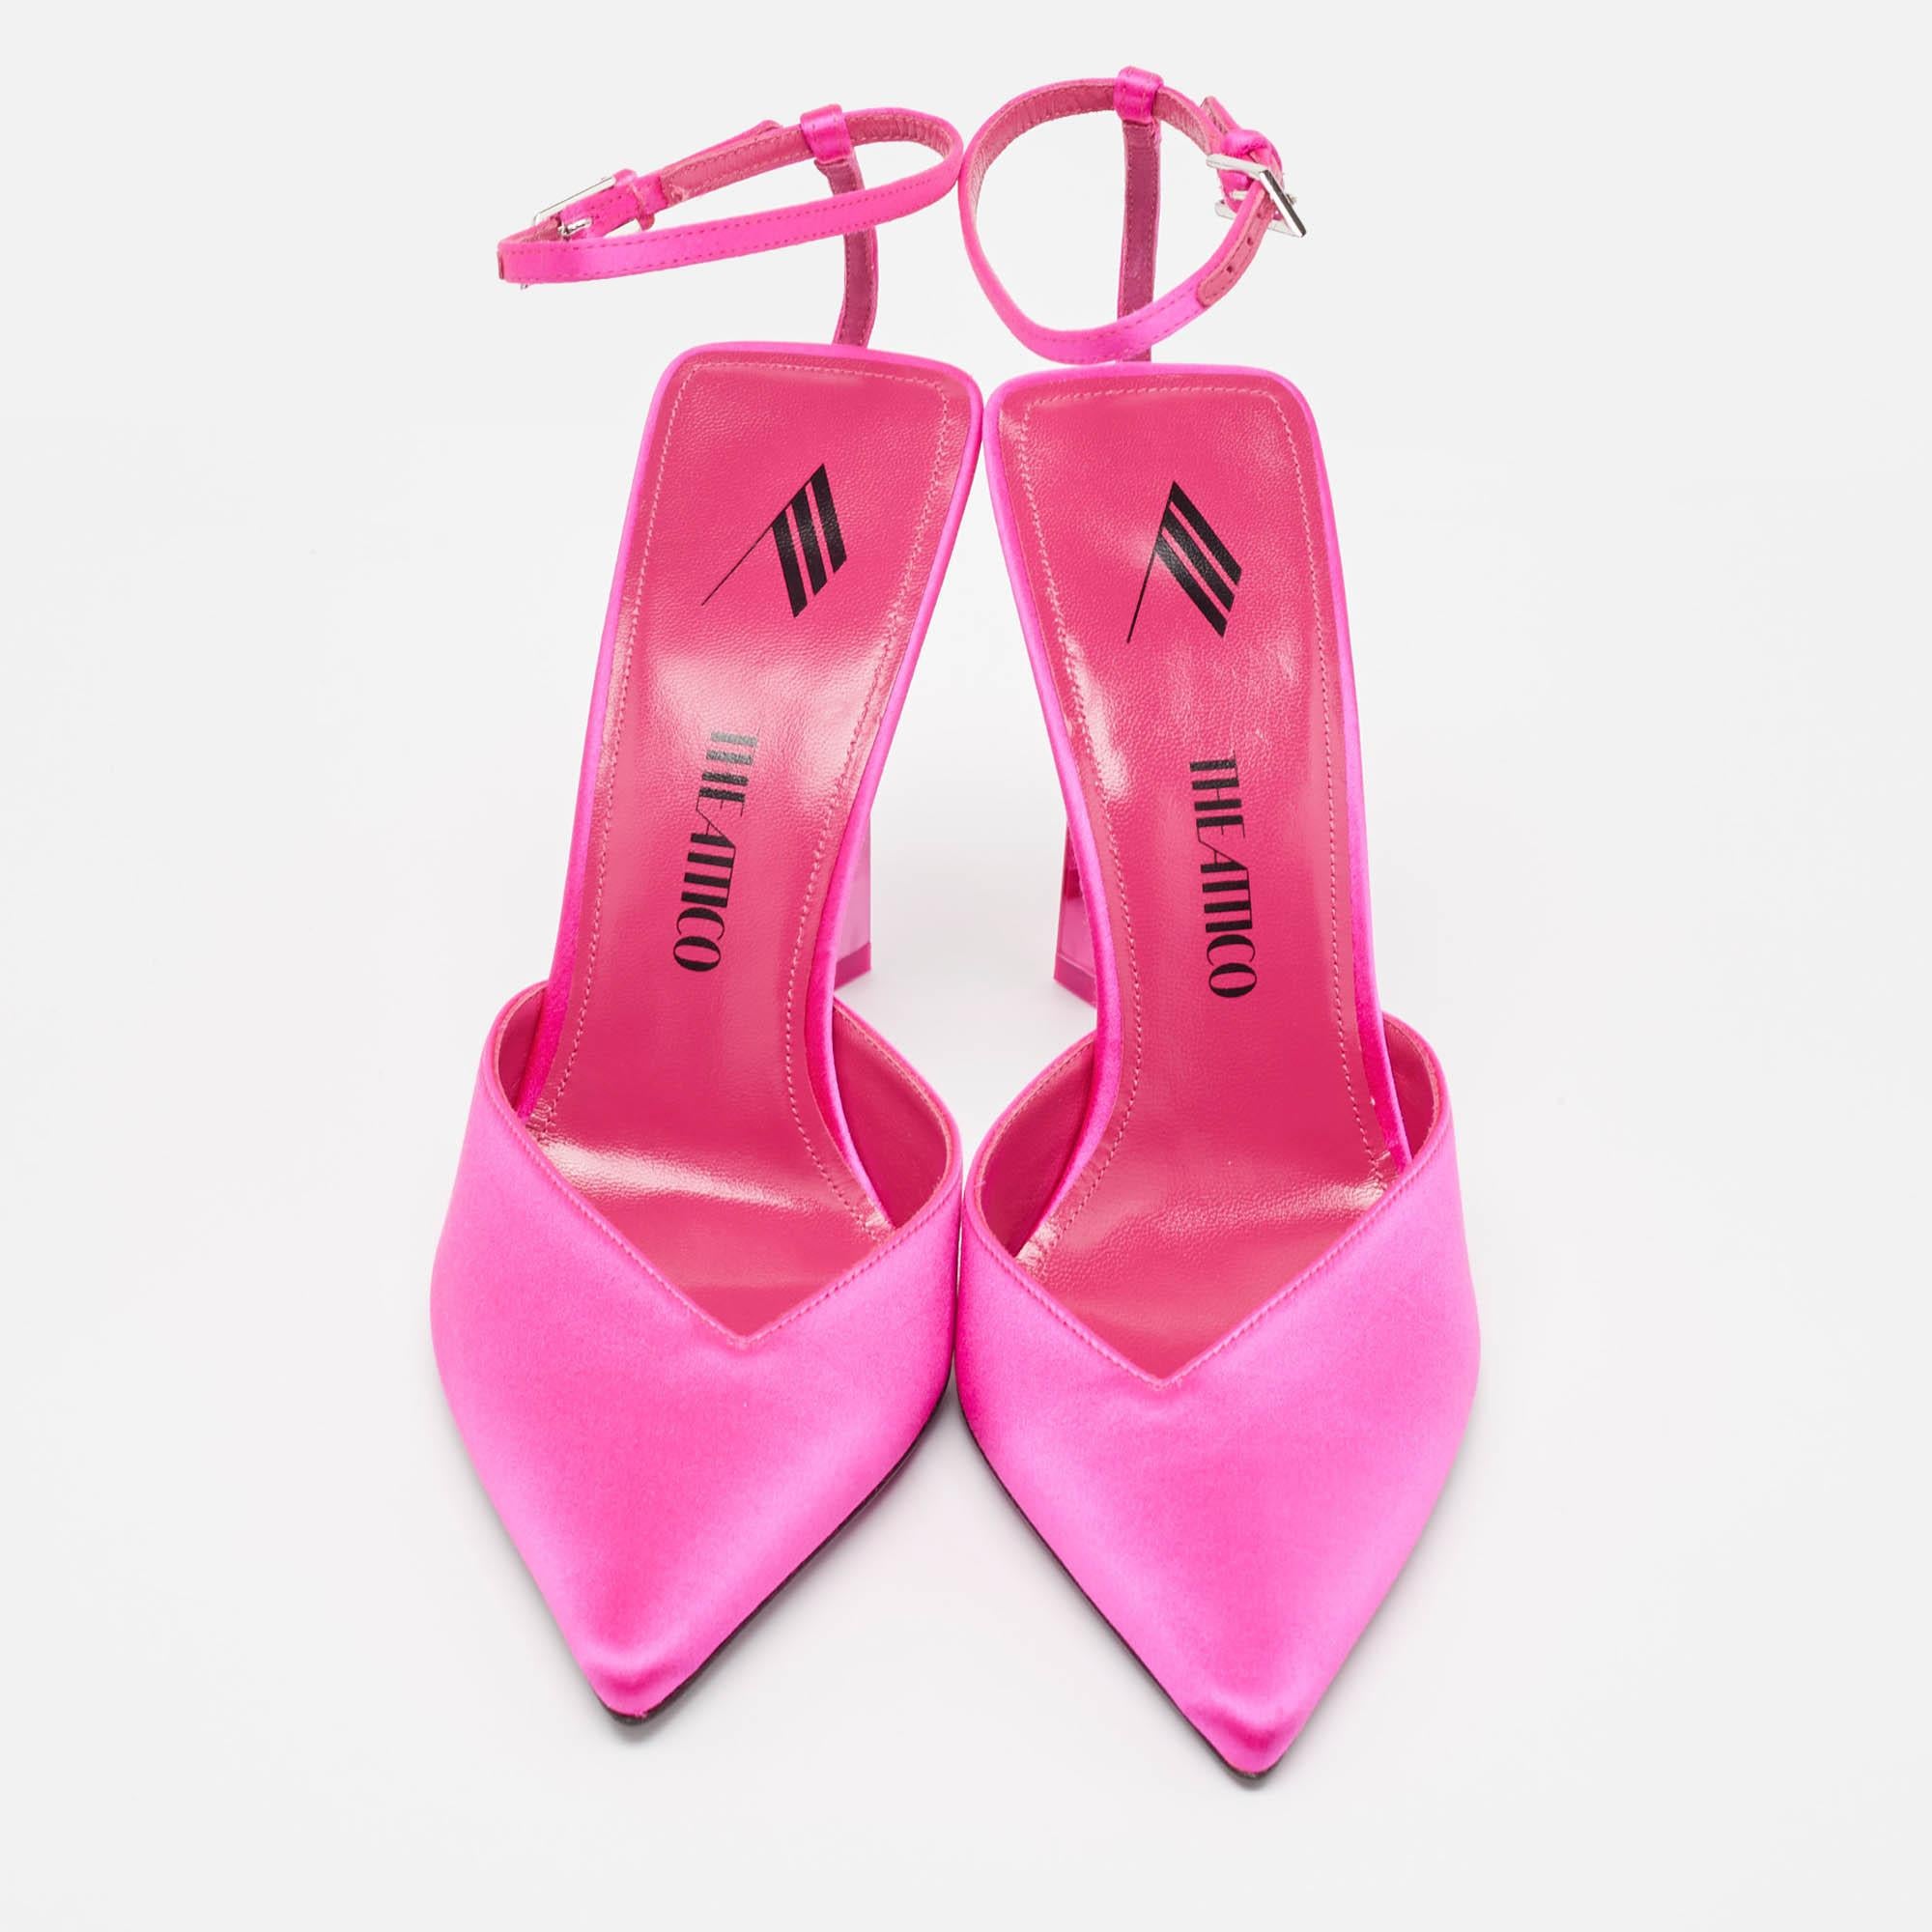 Crafted from lustrous pink satin, The Attico sandals exude timeless charm. With a sleek pointed toe and a delicate strap, these sandals effortlessly blend classic style with modern flair. Perfect for adding a touch of refinement to any ensemble,